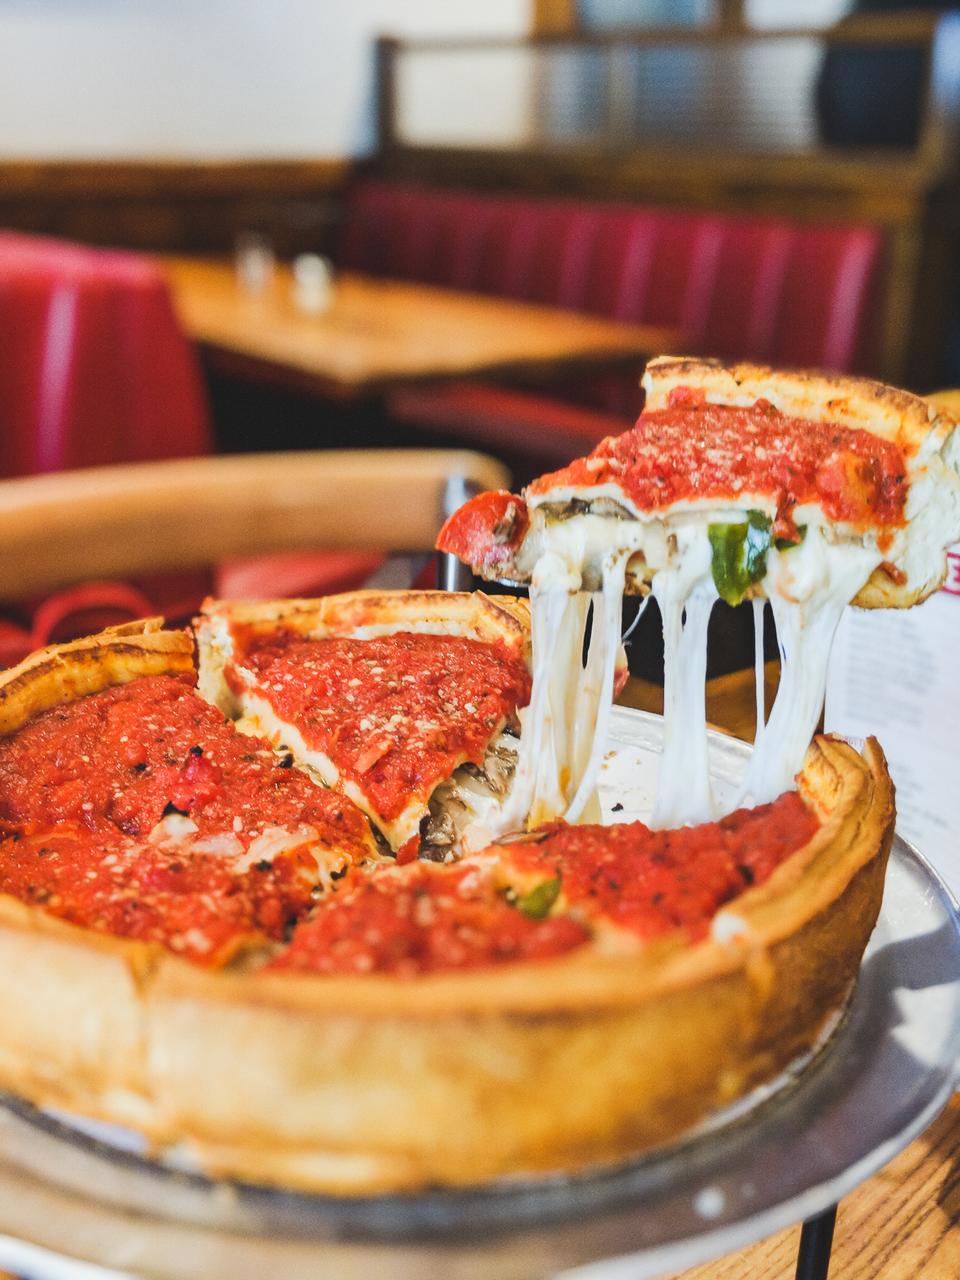 We’ll Guess What 🍁 Season You Were Born In, But You Have to Pick a Food in Every 🌈 Color First Deep-dish pizza